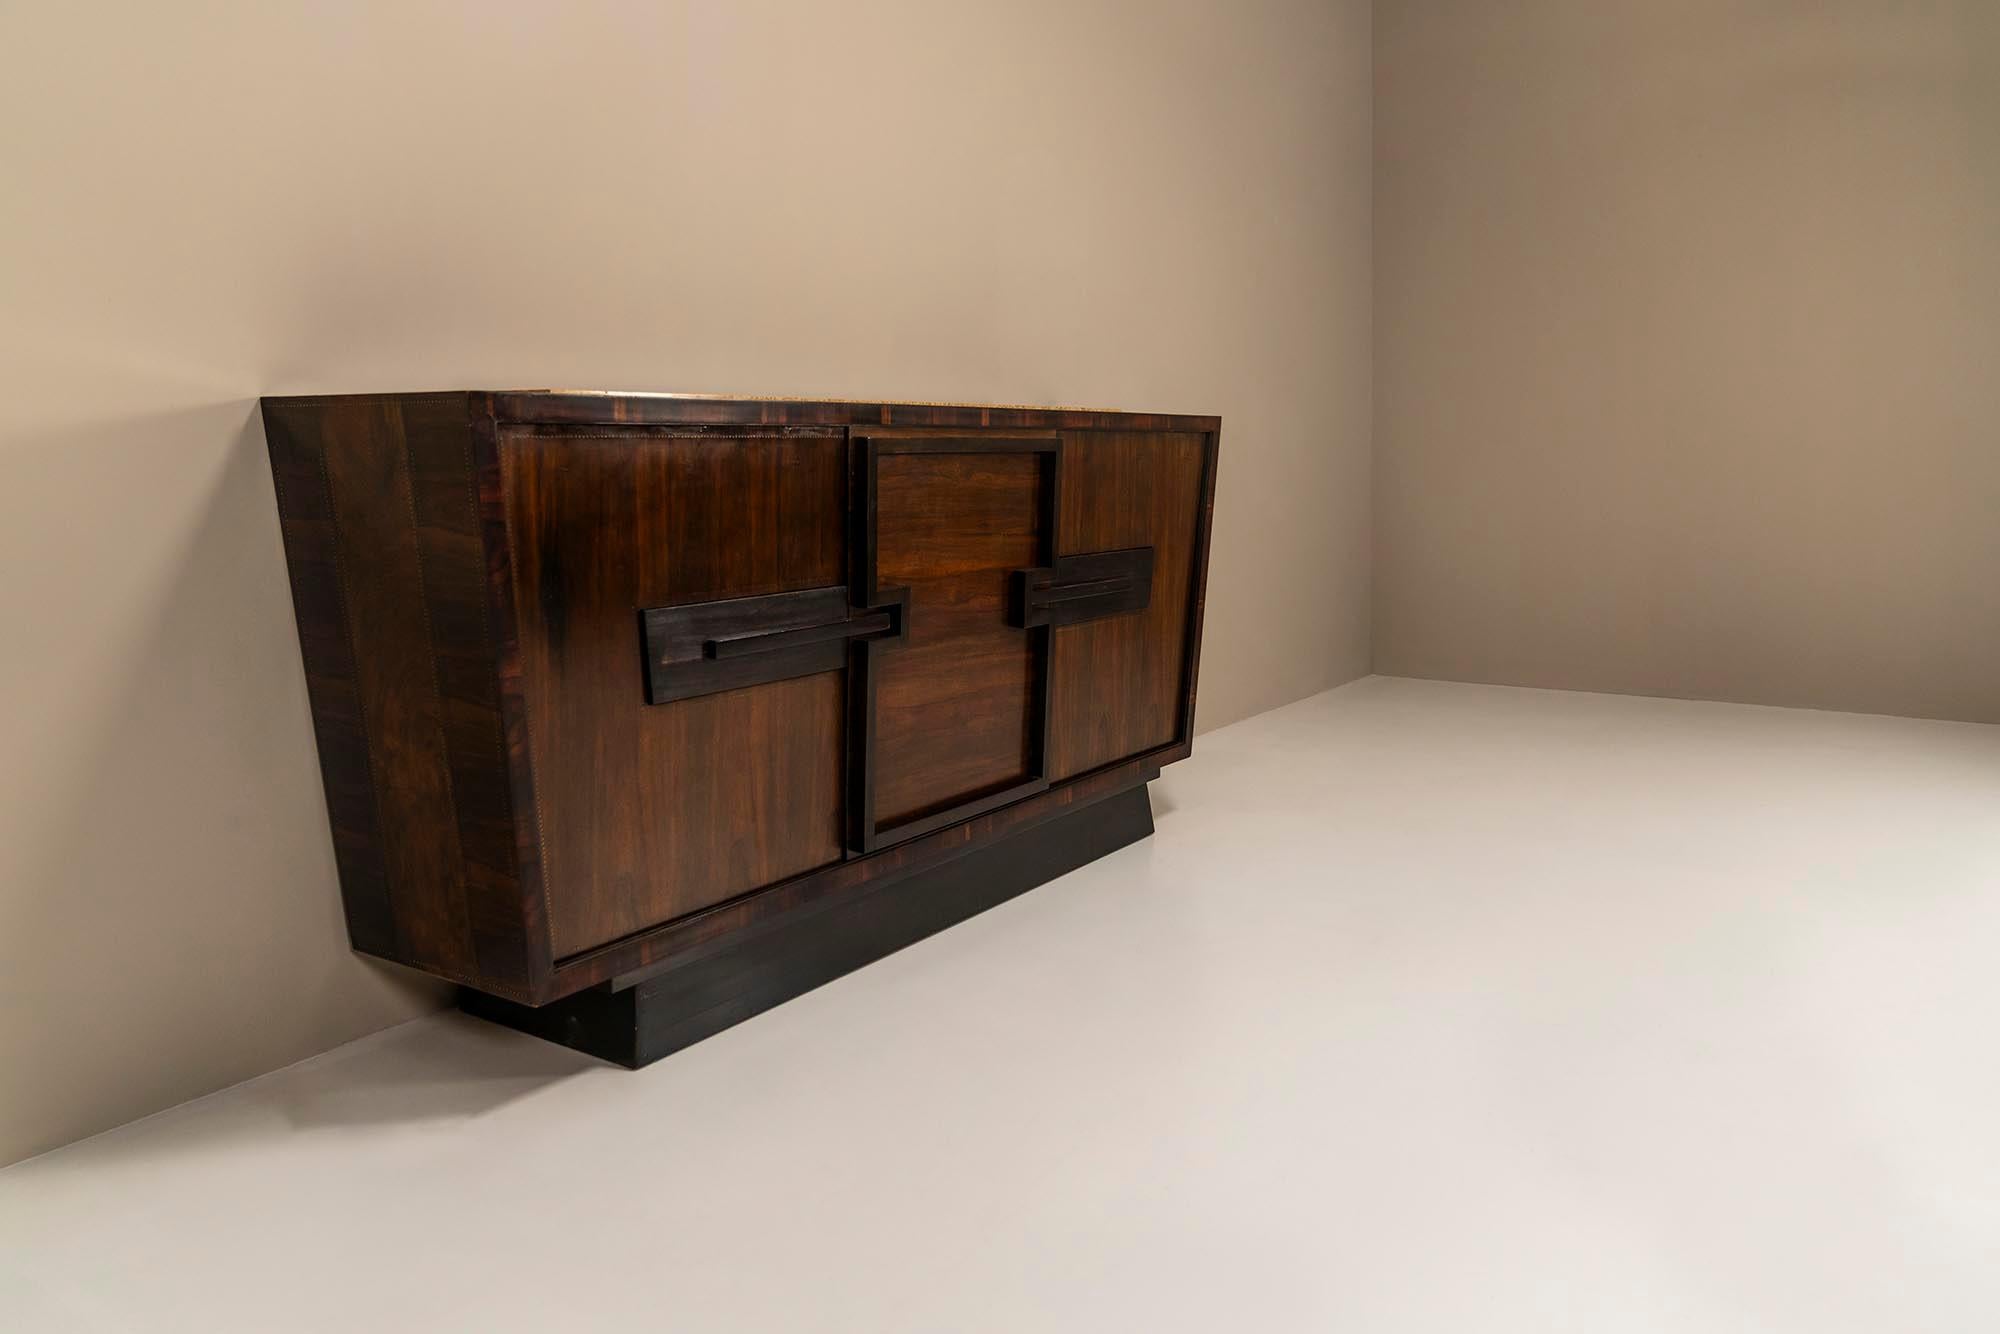 Modernist Sideboard In Studded Rosewood By Andre Sornay, France 1940s For Sale 1